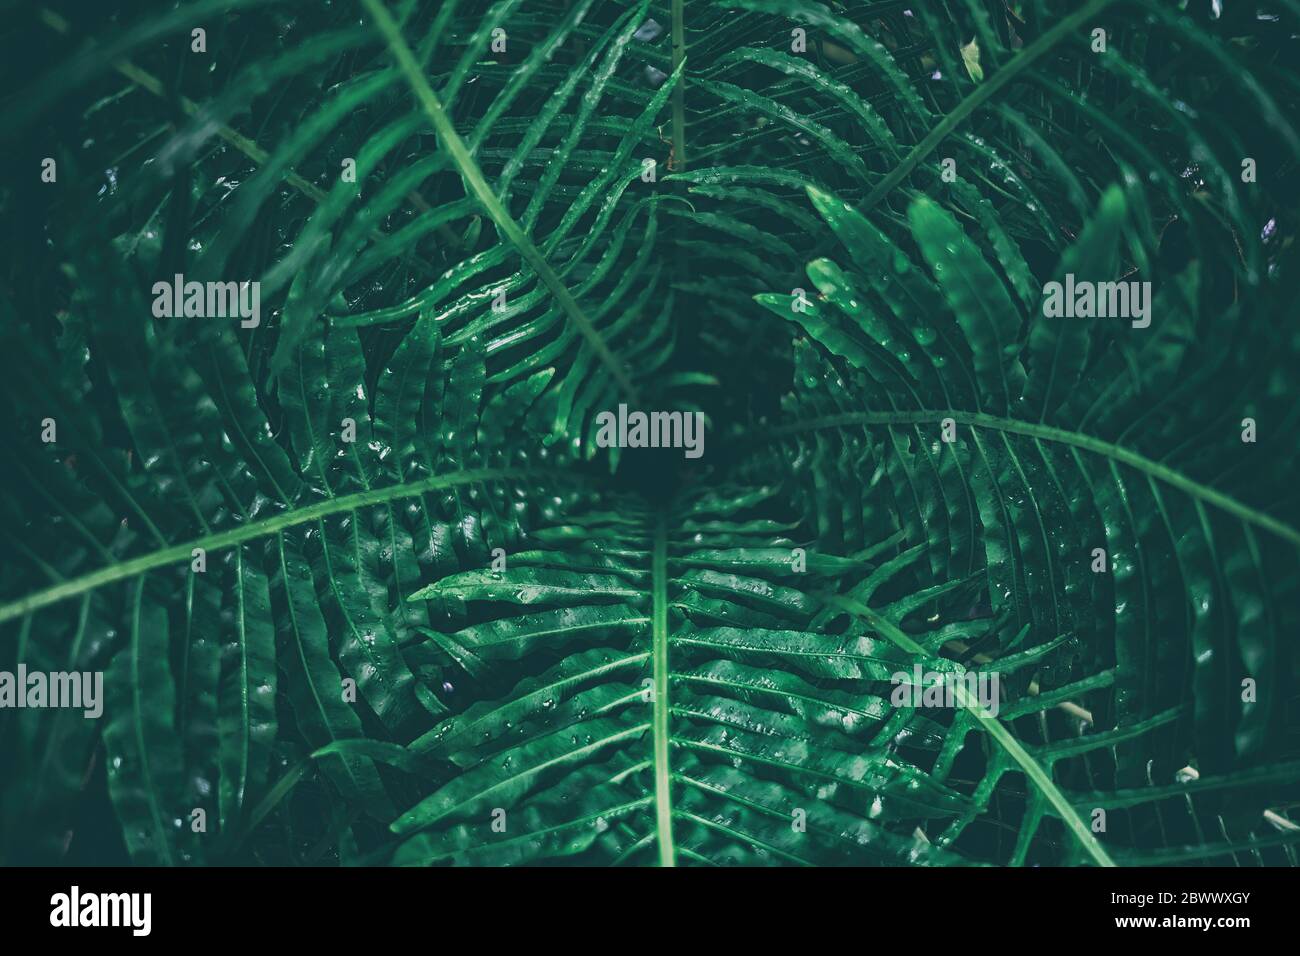 Tropical Leaves Texture in Dark Contrast Background. Stock Photo